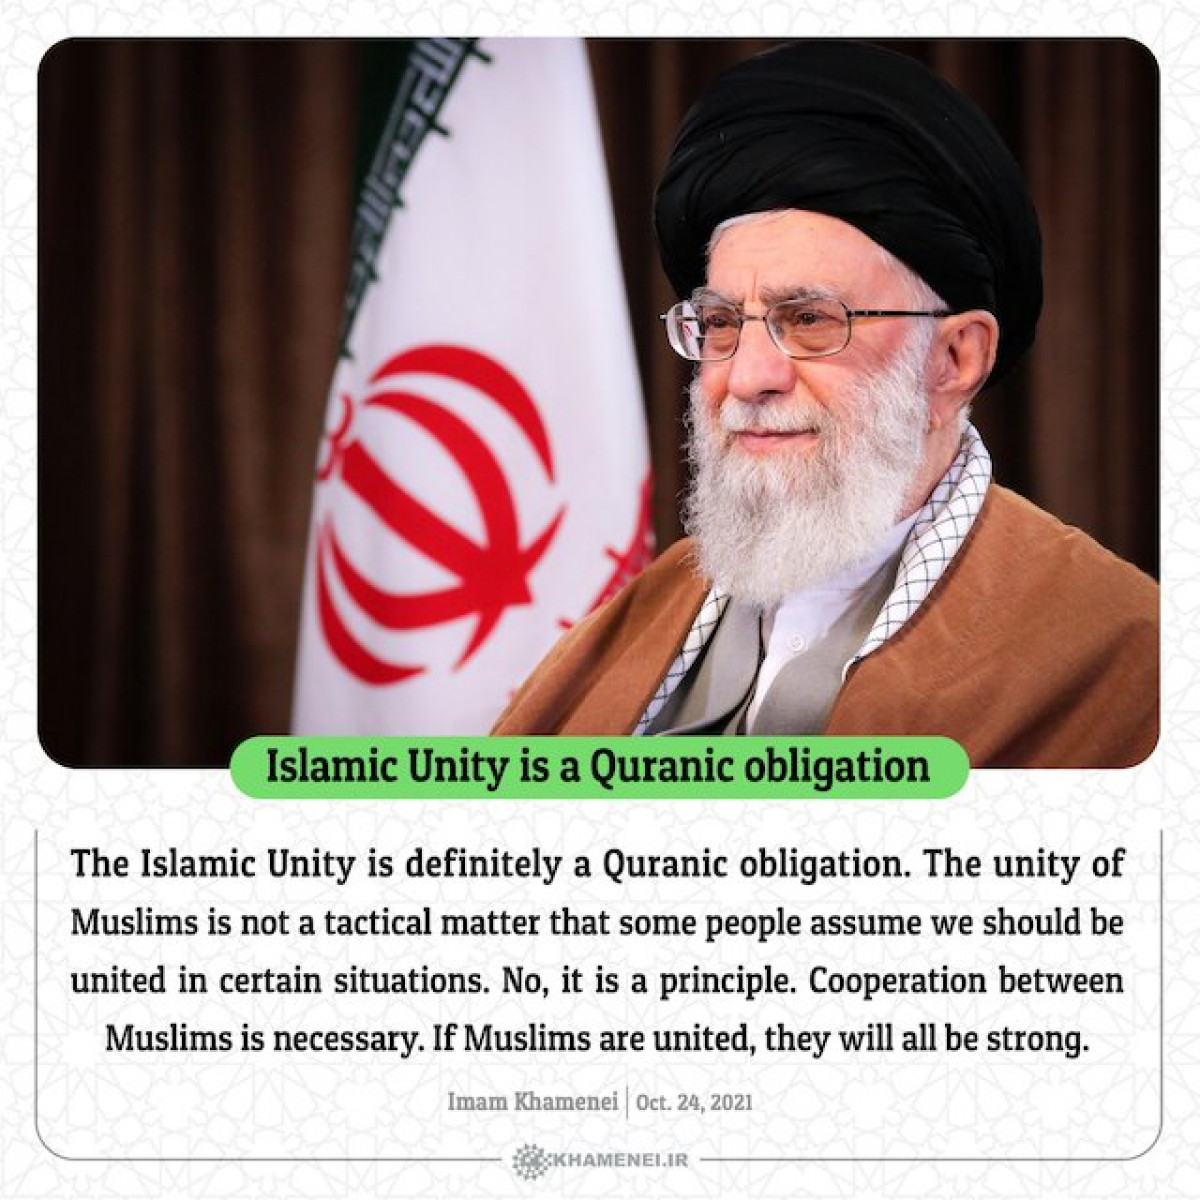 Islamic Unity is a Quranic obligation